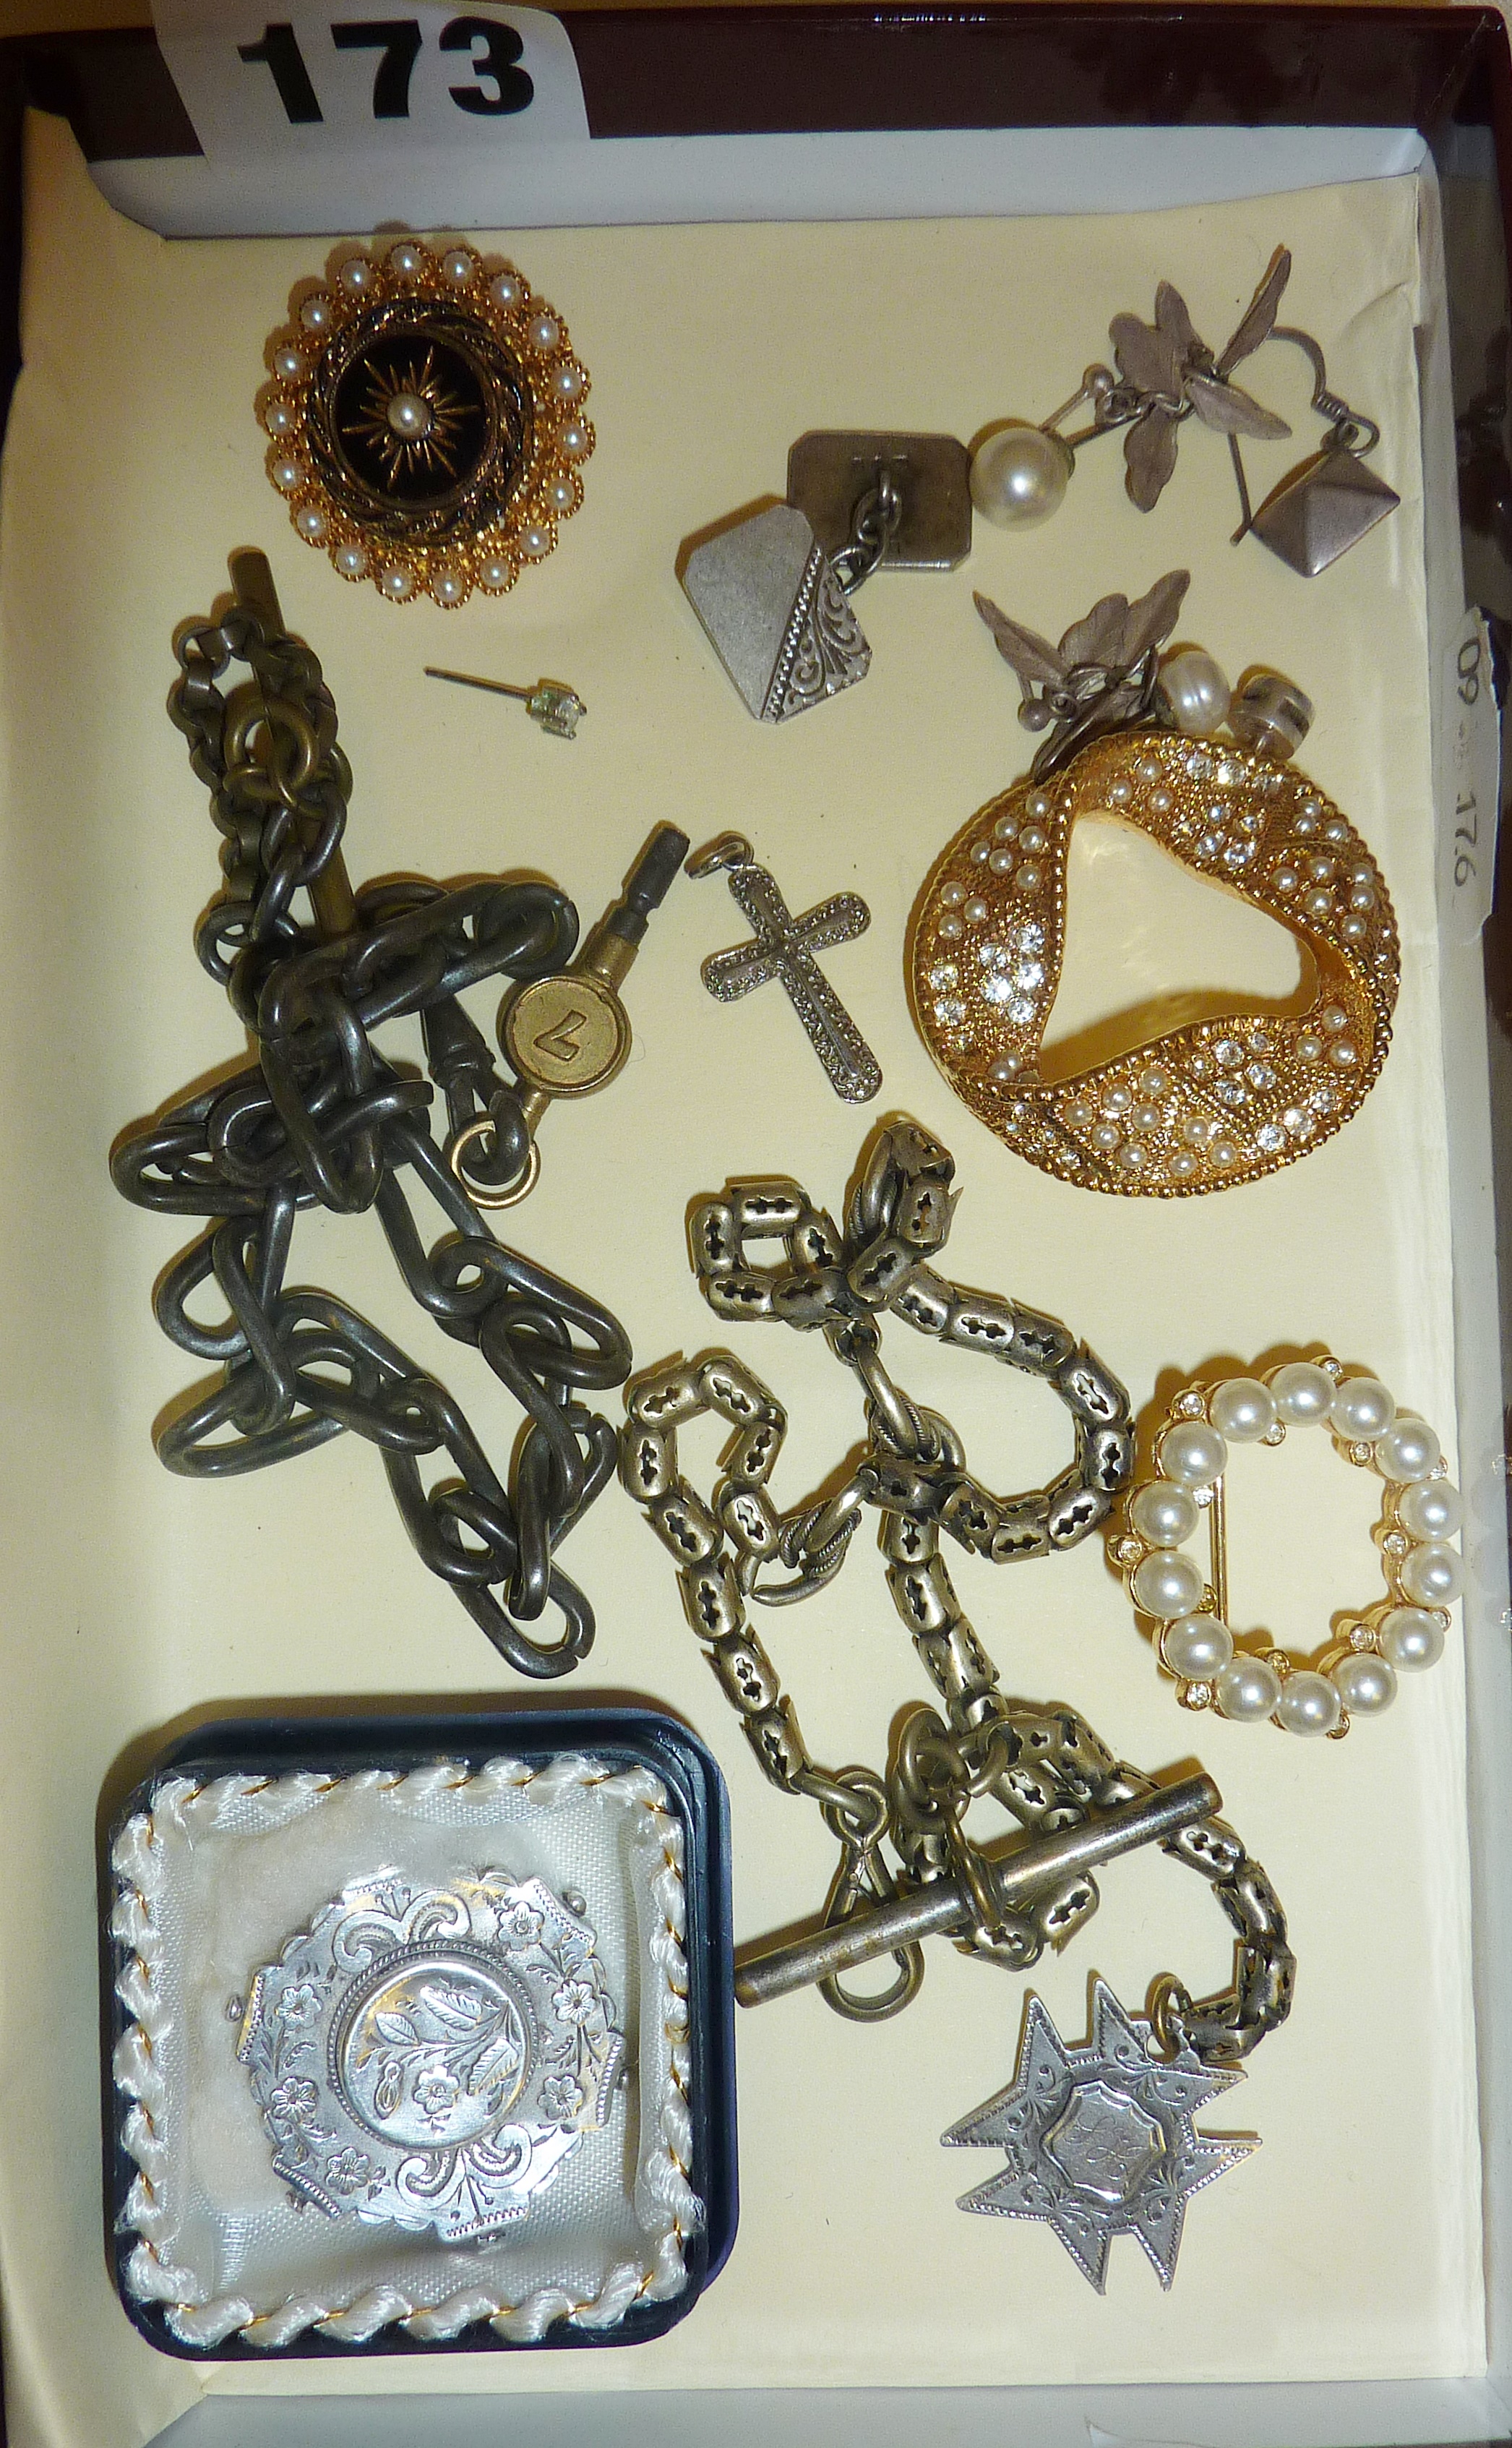 Antique fob watch chain, silver fob medal, antique and vintage jewellery brooches, earrings etc - Image 2 of 3